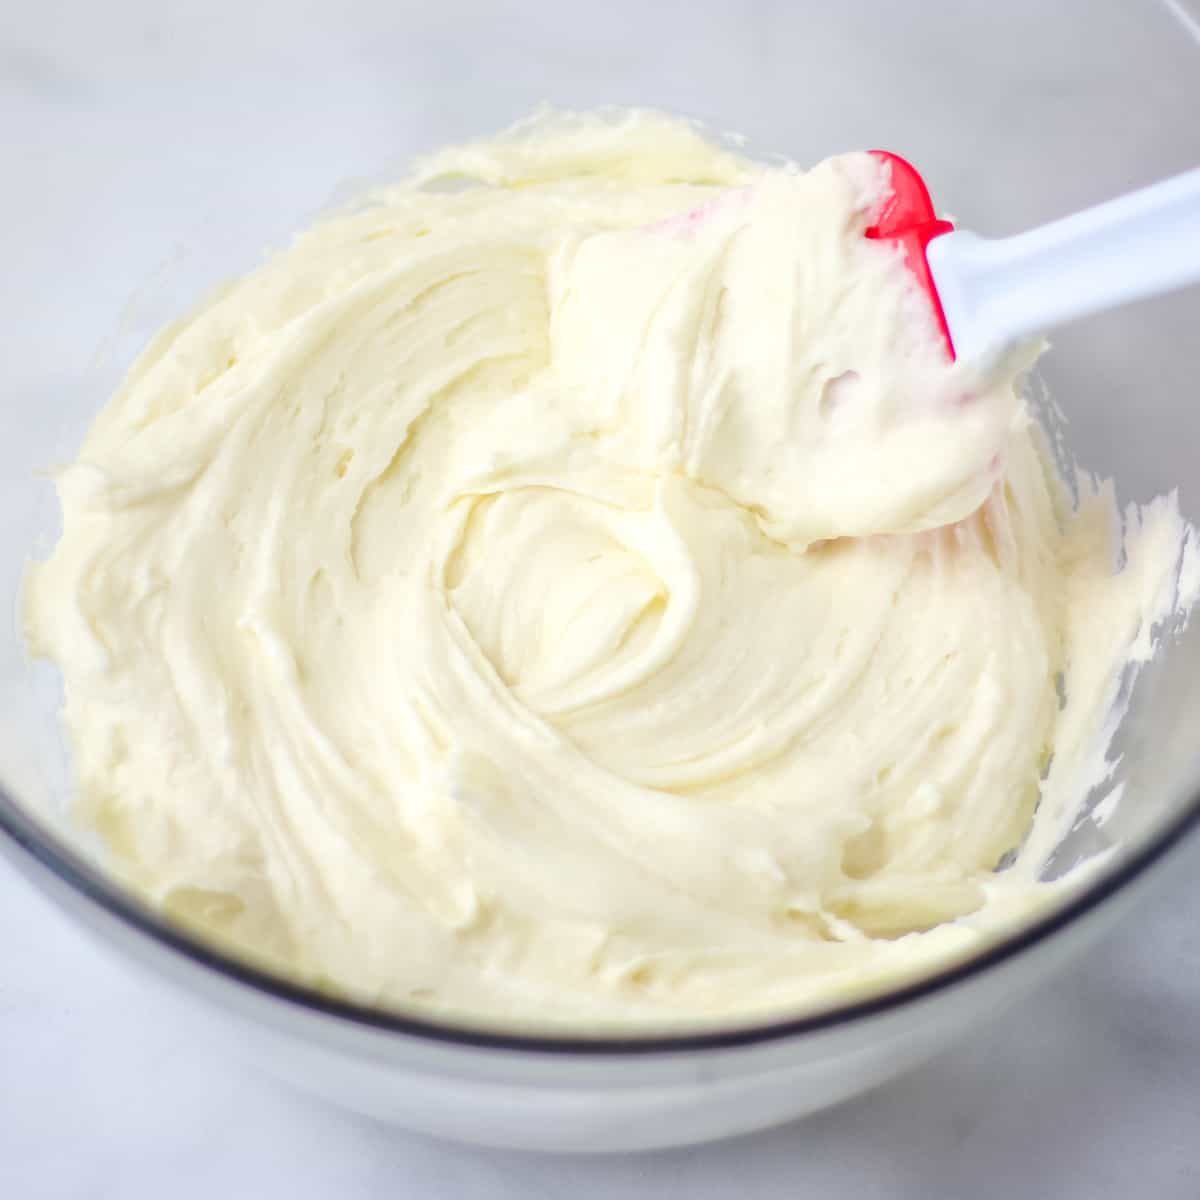 Homemade cream cheese frosting in a glass bowl.